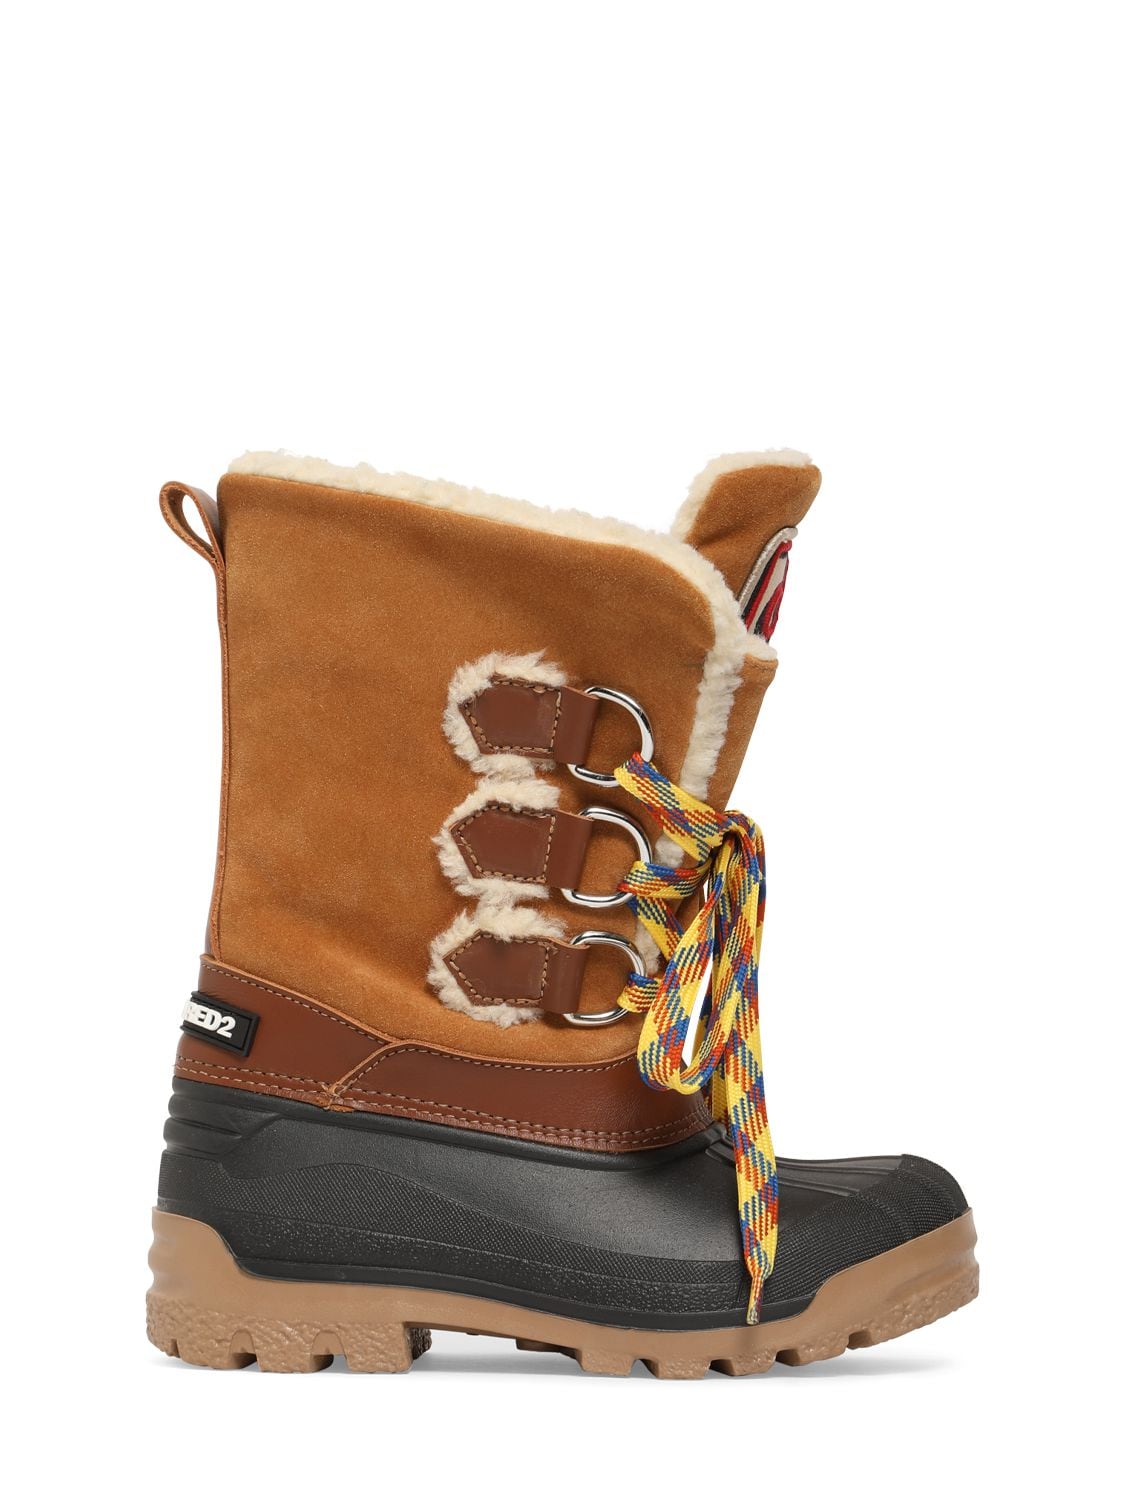 Image of Suede & Rubber Snow Boots